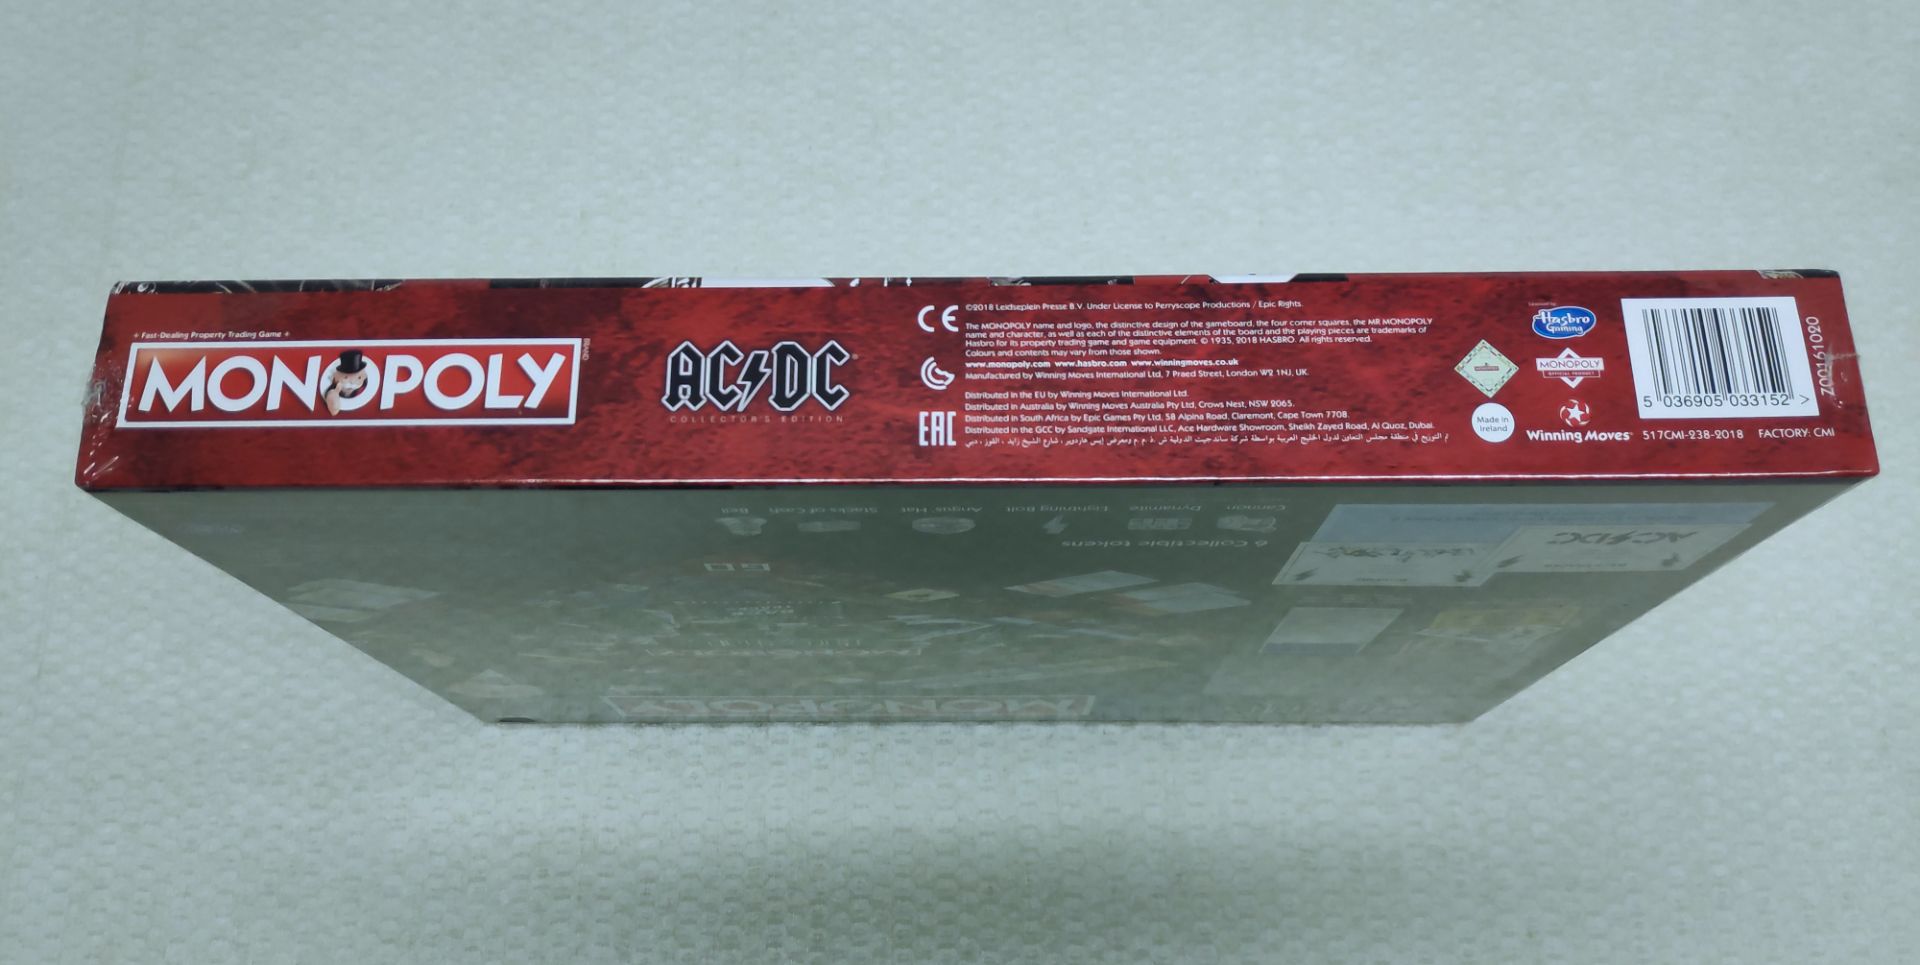 1 x AC/DC Collector's Edition Monopoly - New/Sealed - HTYS169 - CL720 - Location: Altrincham WA14<BR - Image 6 of 8